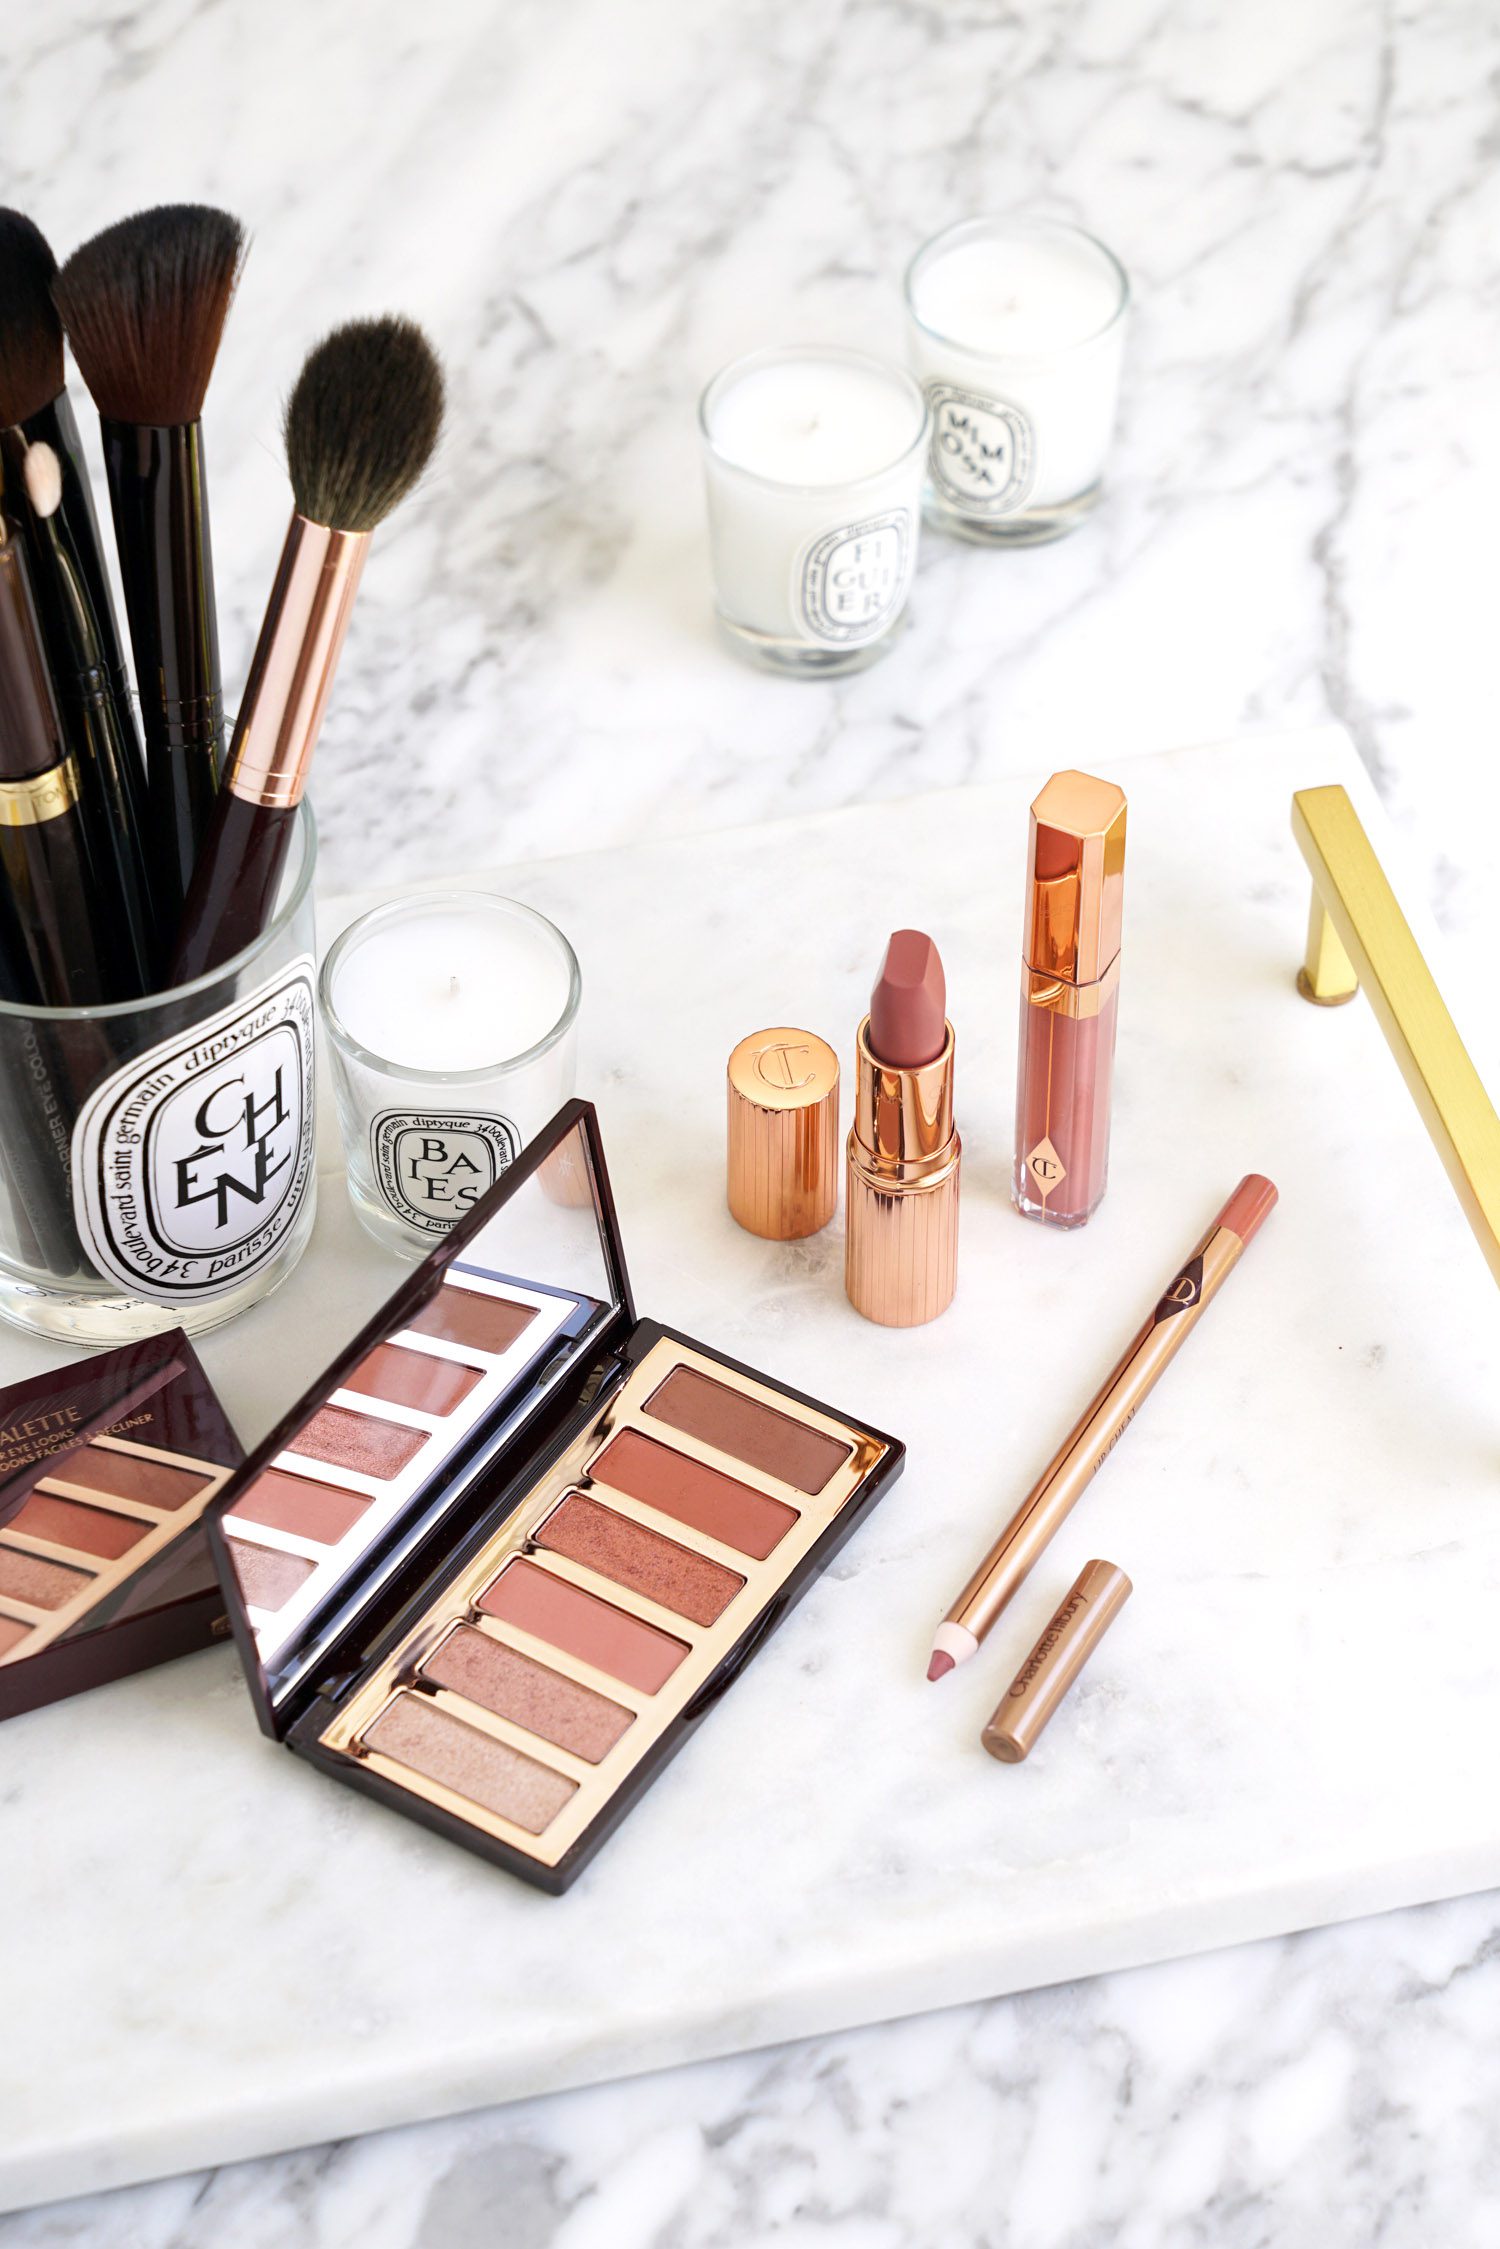 Charlotte Tilbury Nordstrom Anniversary Sale Beauty Exclusives review and s...